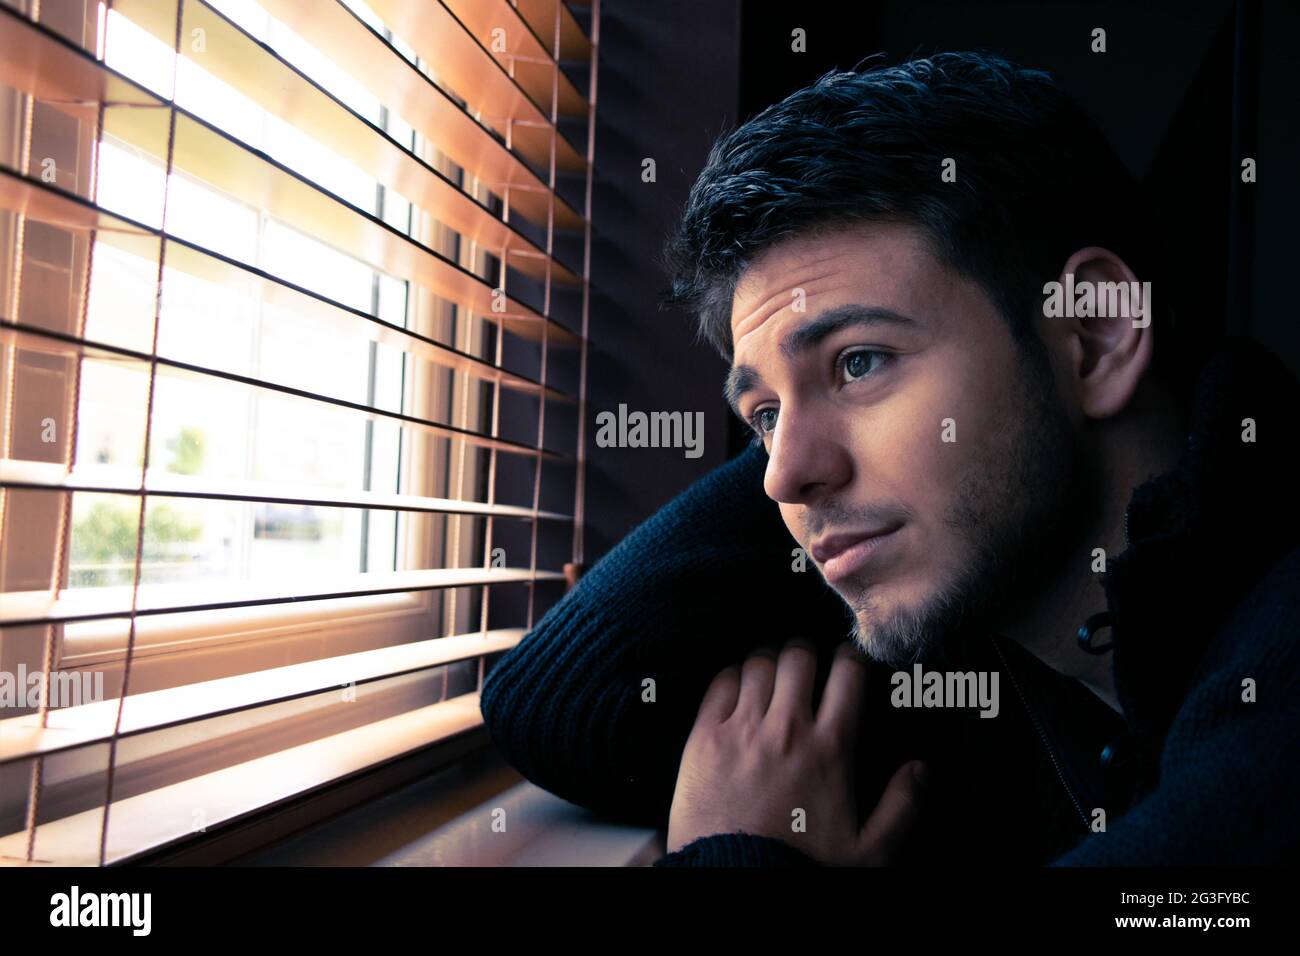 Portrait of attractive man with beard sitting next to window with wood blinds. Stock Photo